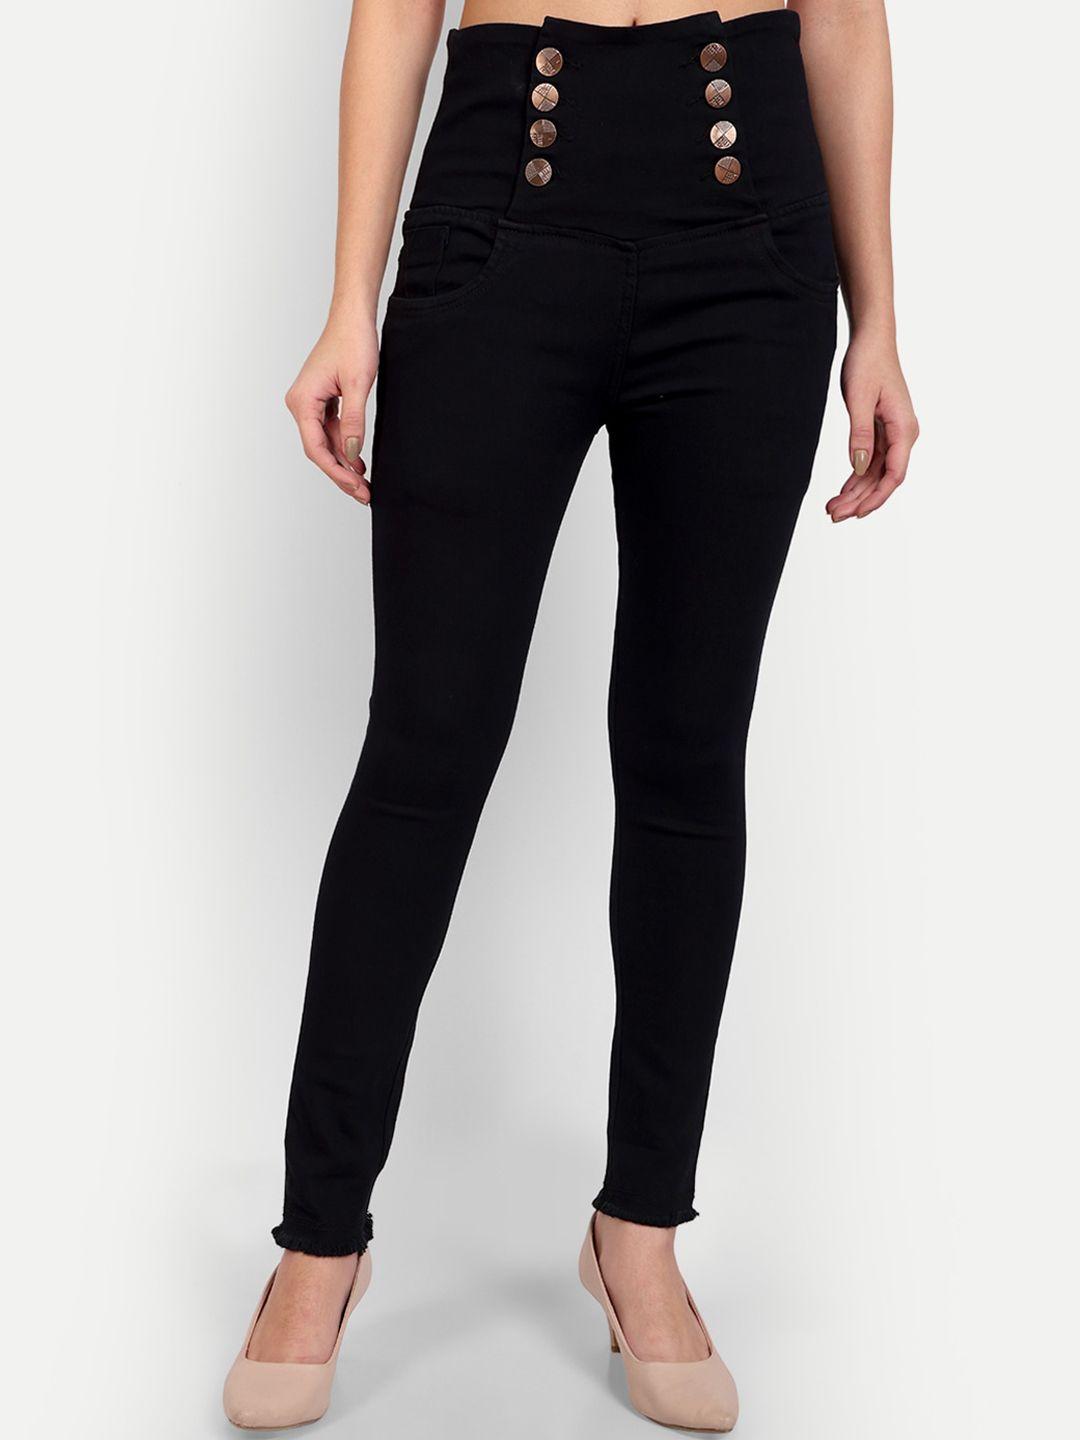 baesd women black jean high-rise stretchable jeans